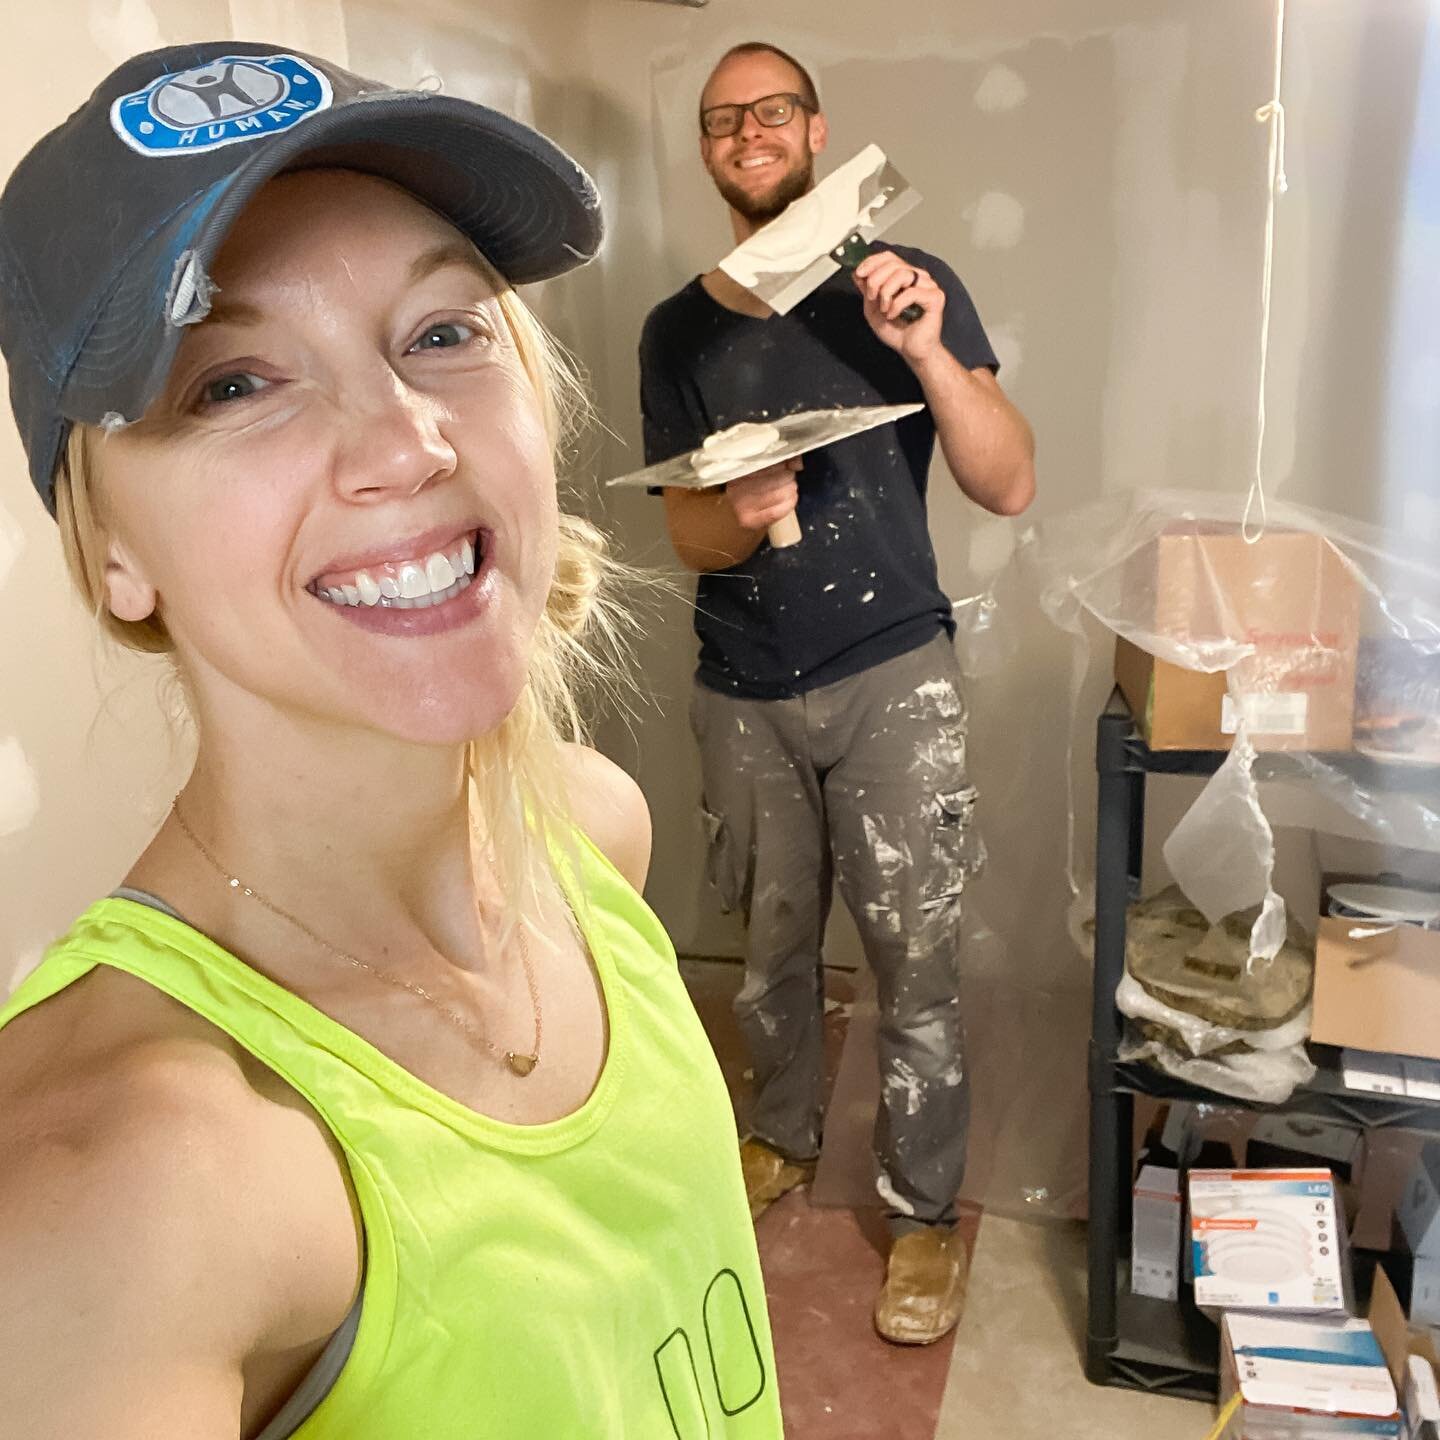 Slacking on the workouts &amp; recipes because I&rsquo;ve been busy mastering my mudding s k i l l s, working and sleeping and that&rsquo;s about it. We&rsquo;re SO close with this drywall, the painting has started and floors arrive next weekend so w